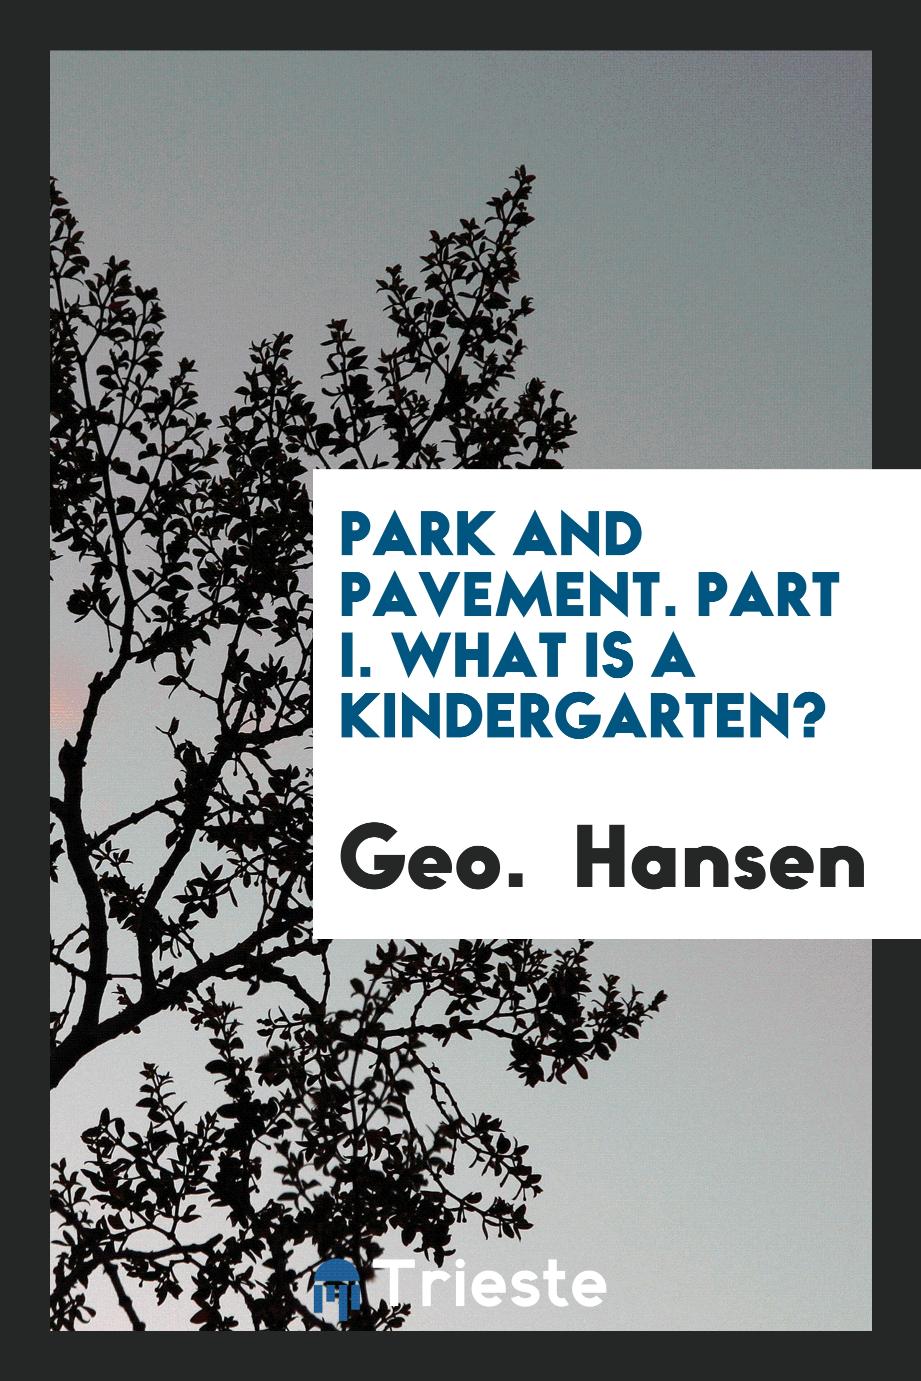 Park and Pavement. Part I. What is a Kindergarten?